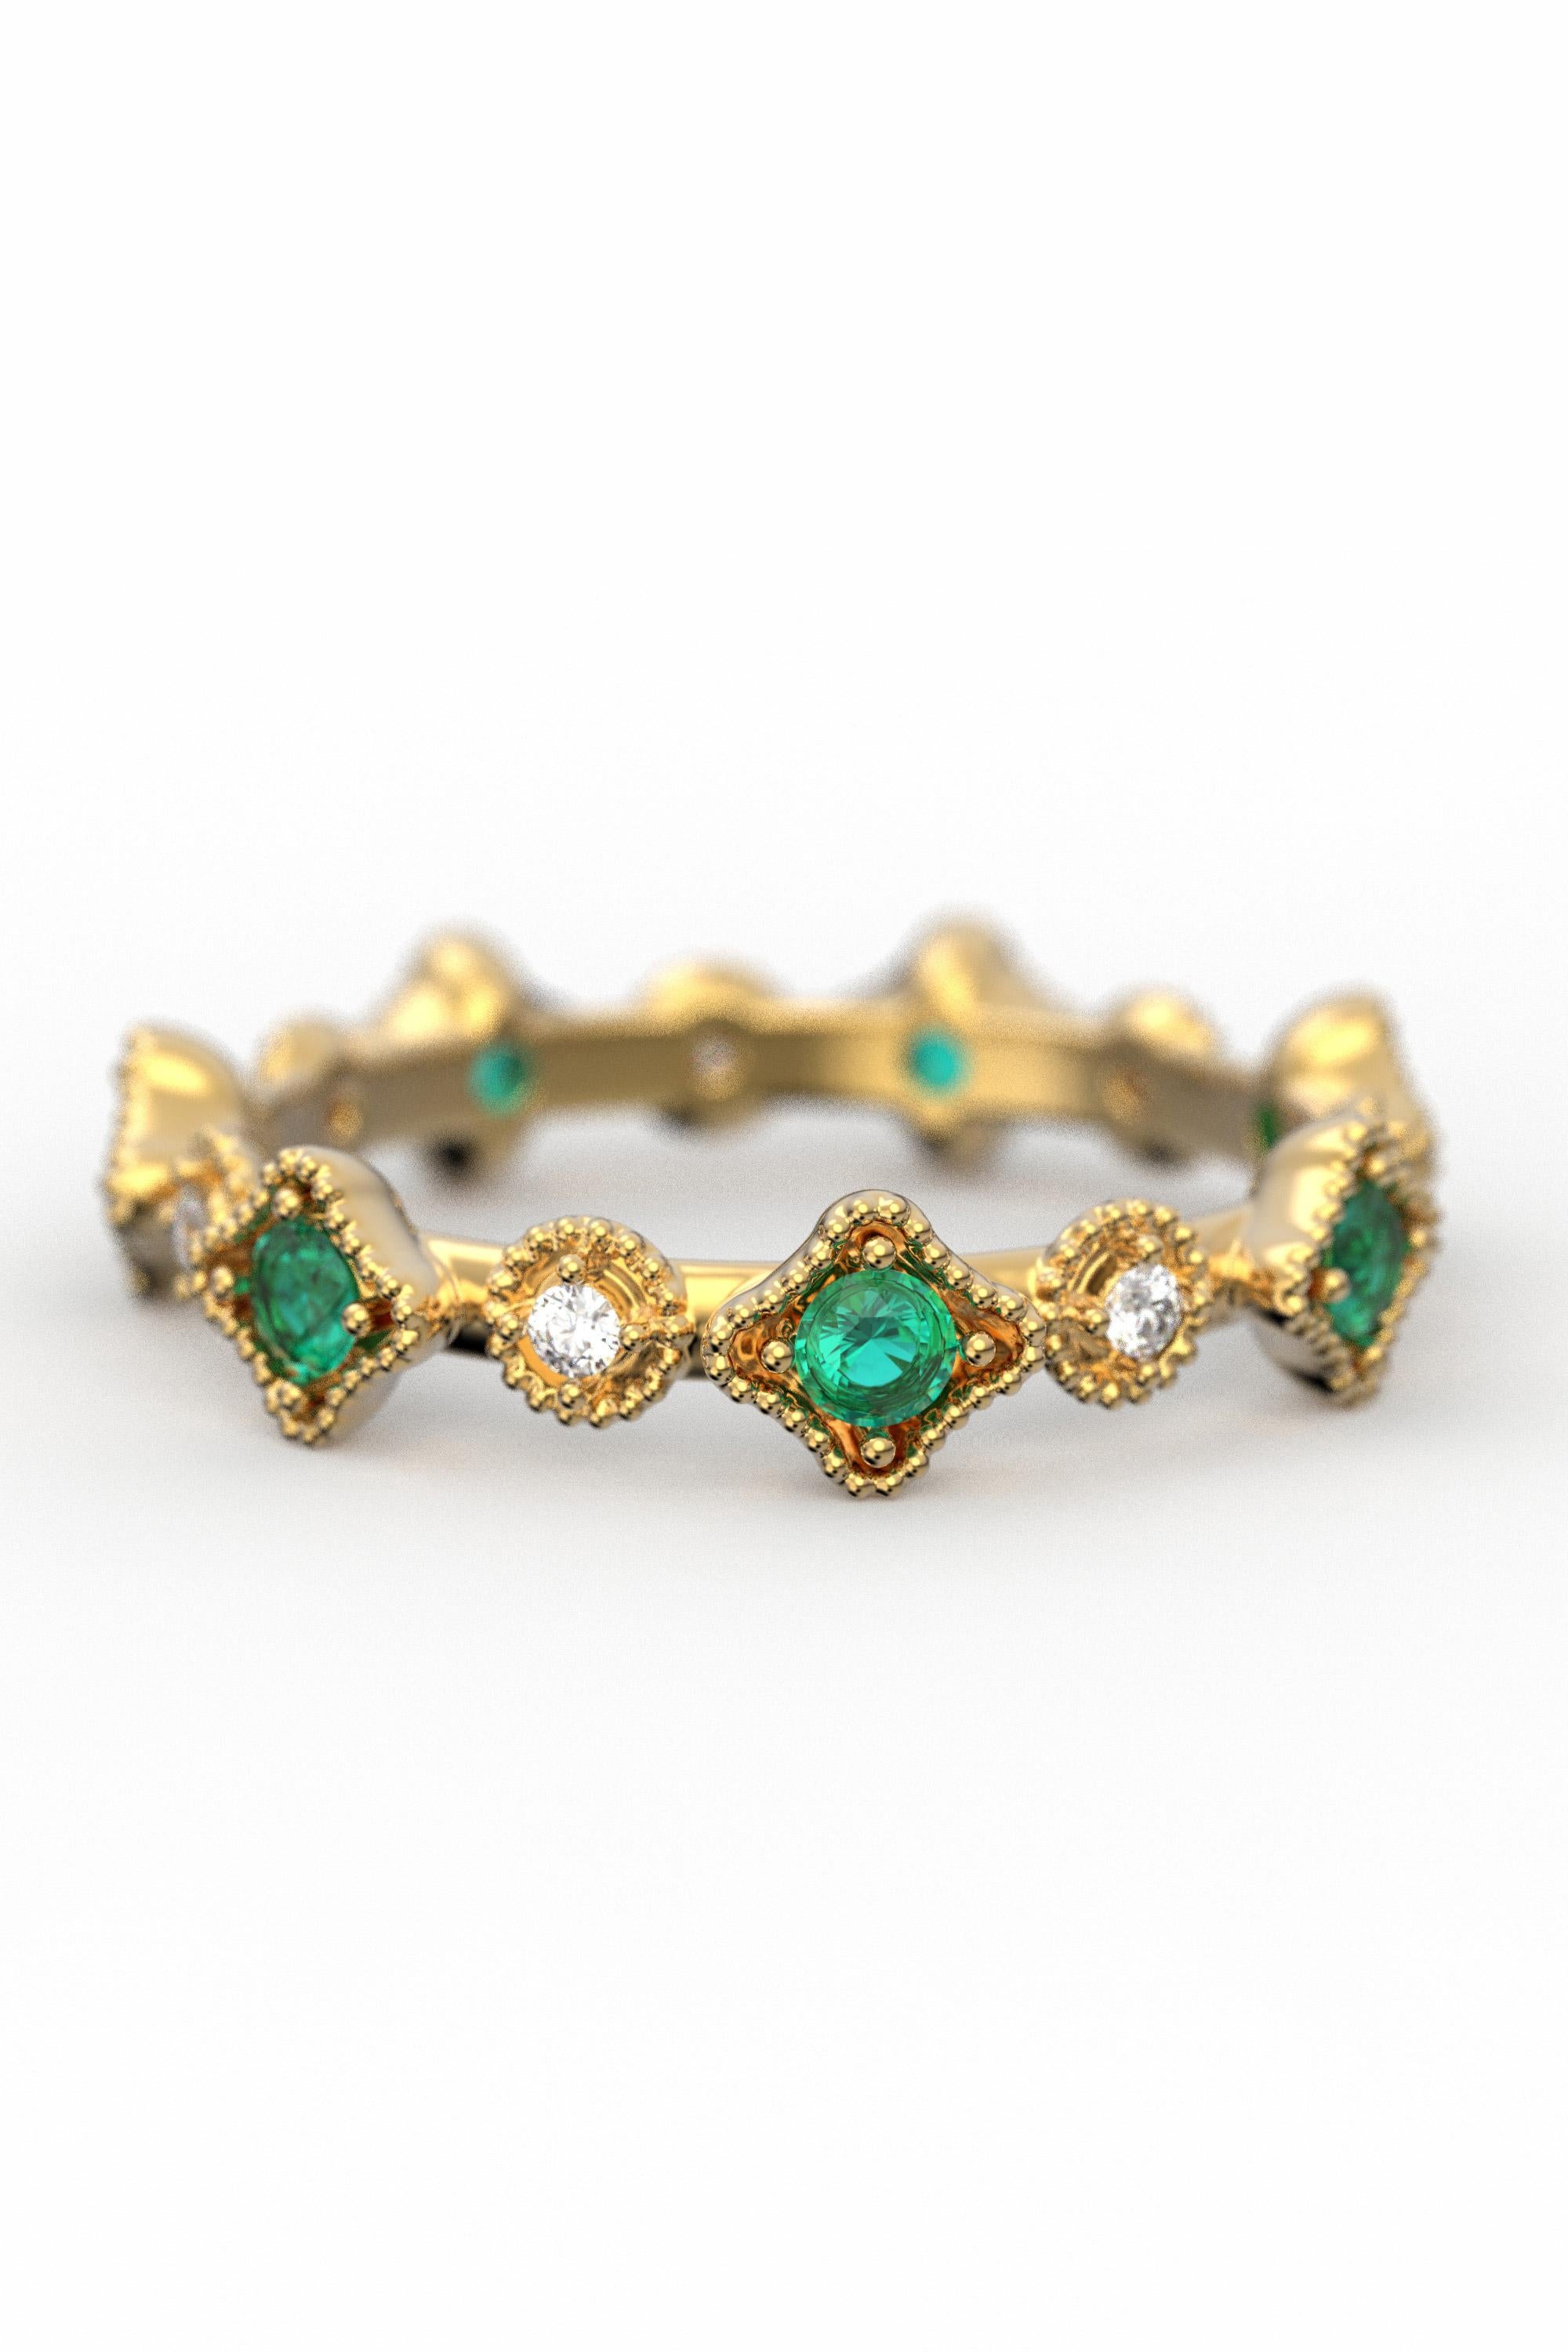 For Sale:  18k Gold Eternity Band with Natural Emerald and Diamonds, Made in Italy Jewelry 3